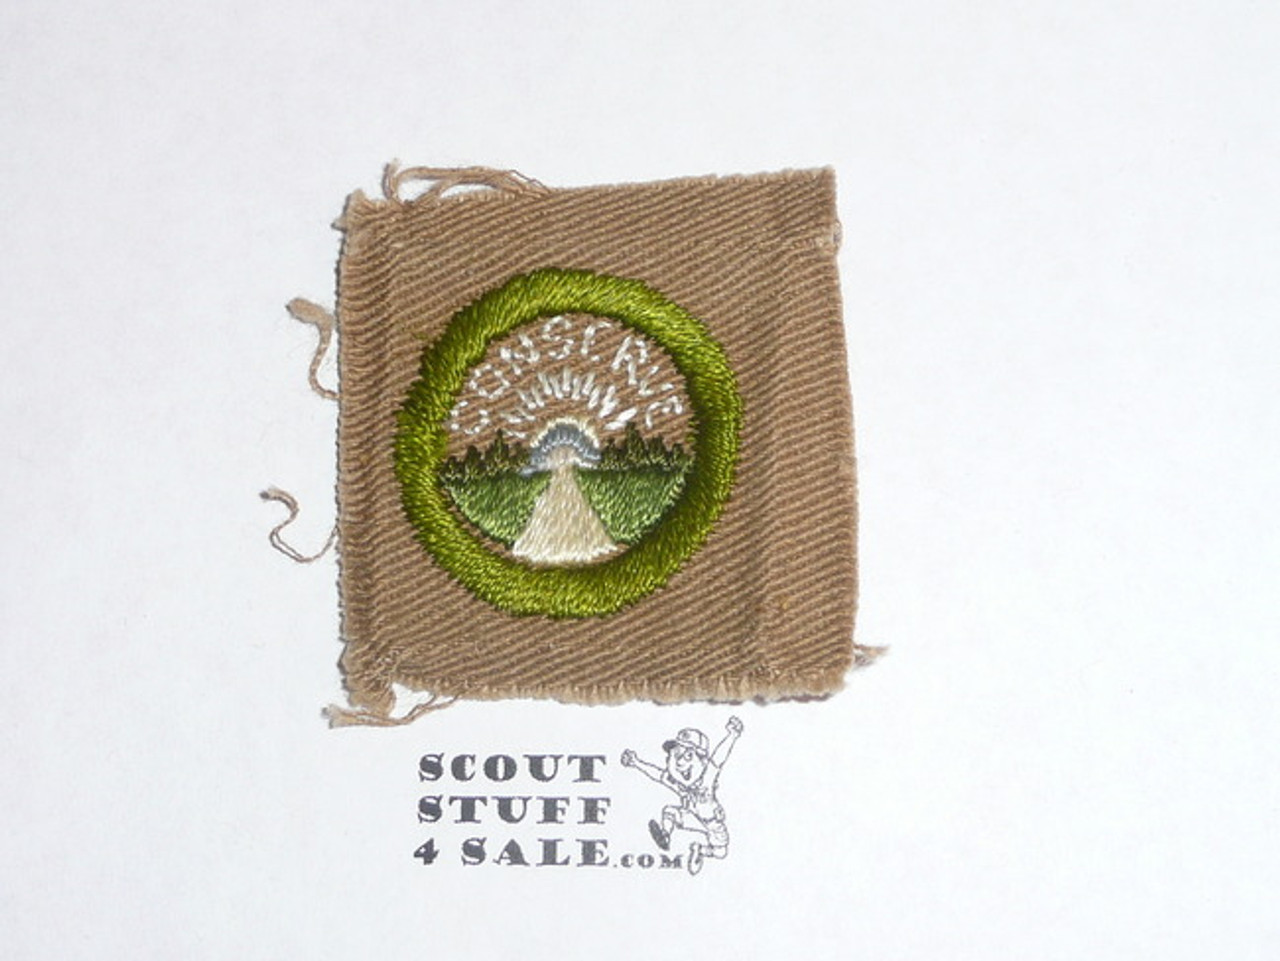 Conservation - Type A - Square Tan Merit Badge (1911-1933), lt use